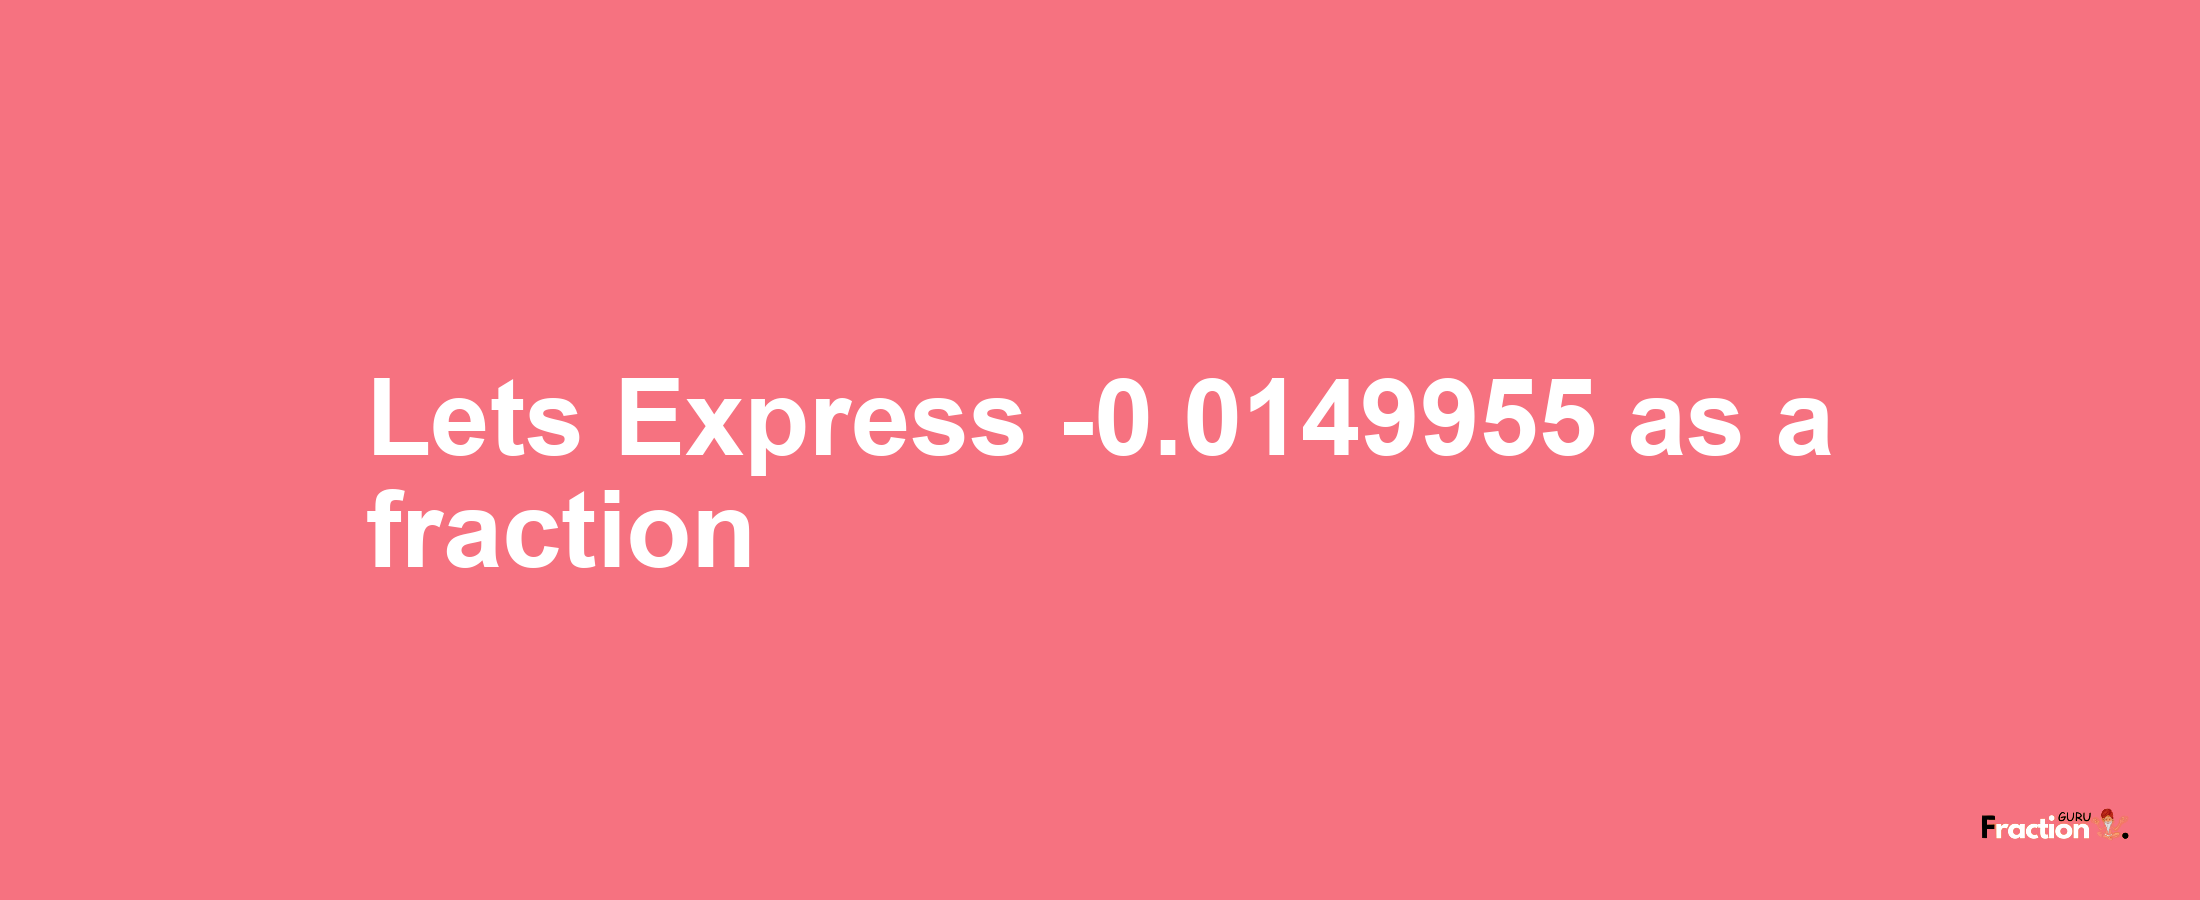 Lets Express -0.0149955 as afraction